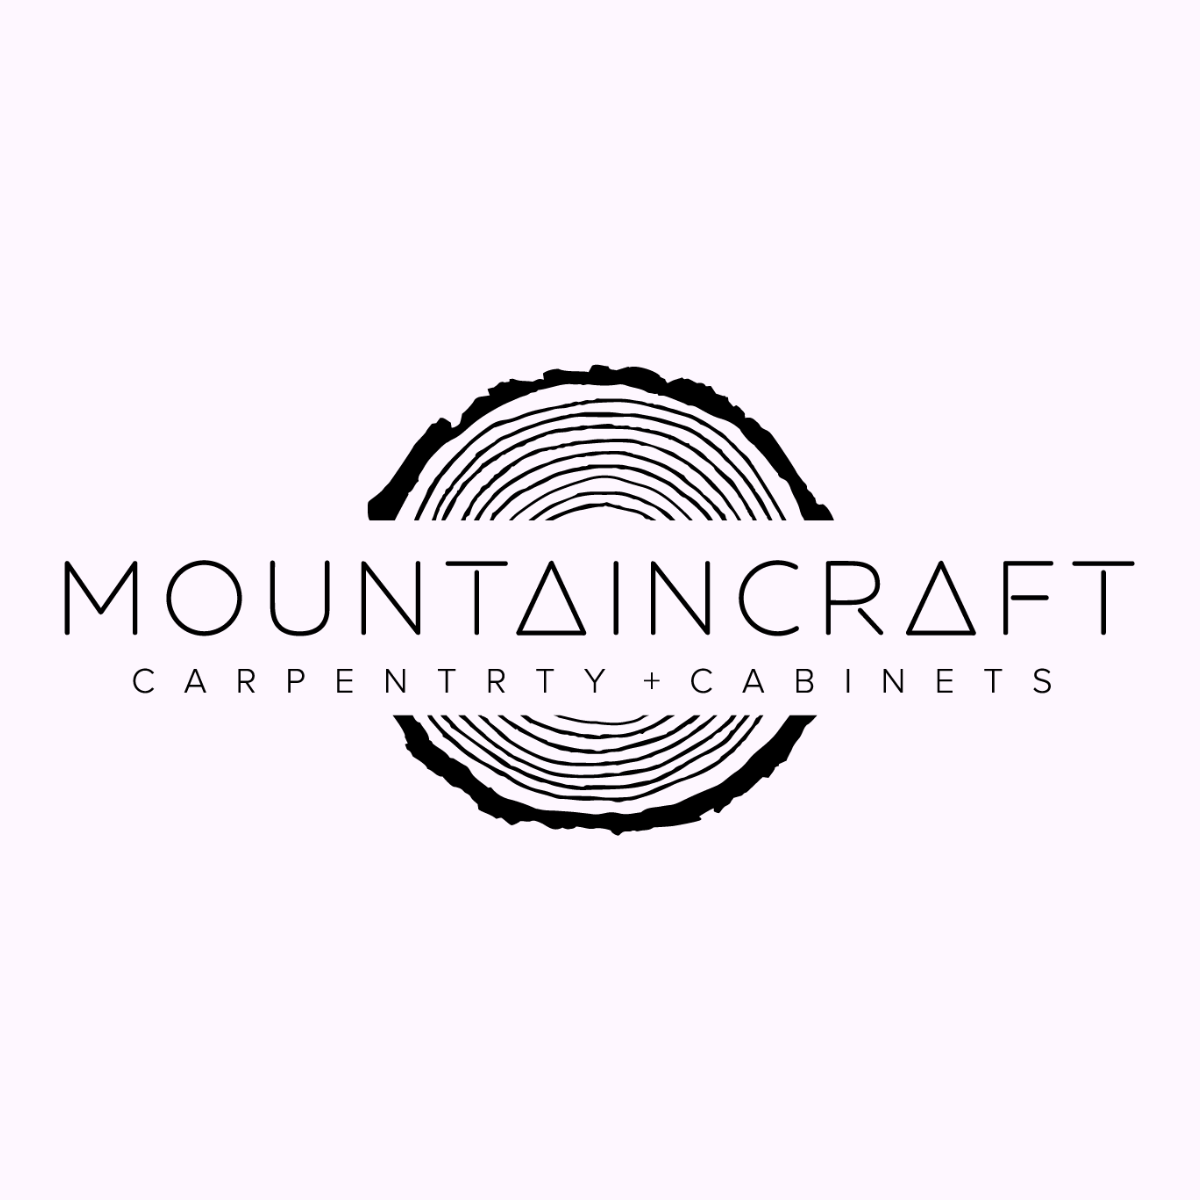 Mountaincraft Carpentry & Cabinets